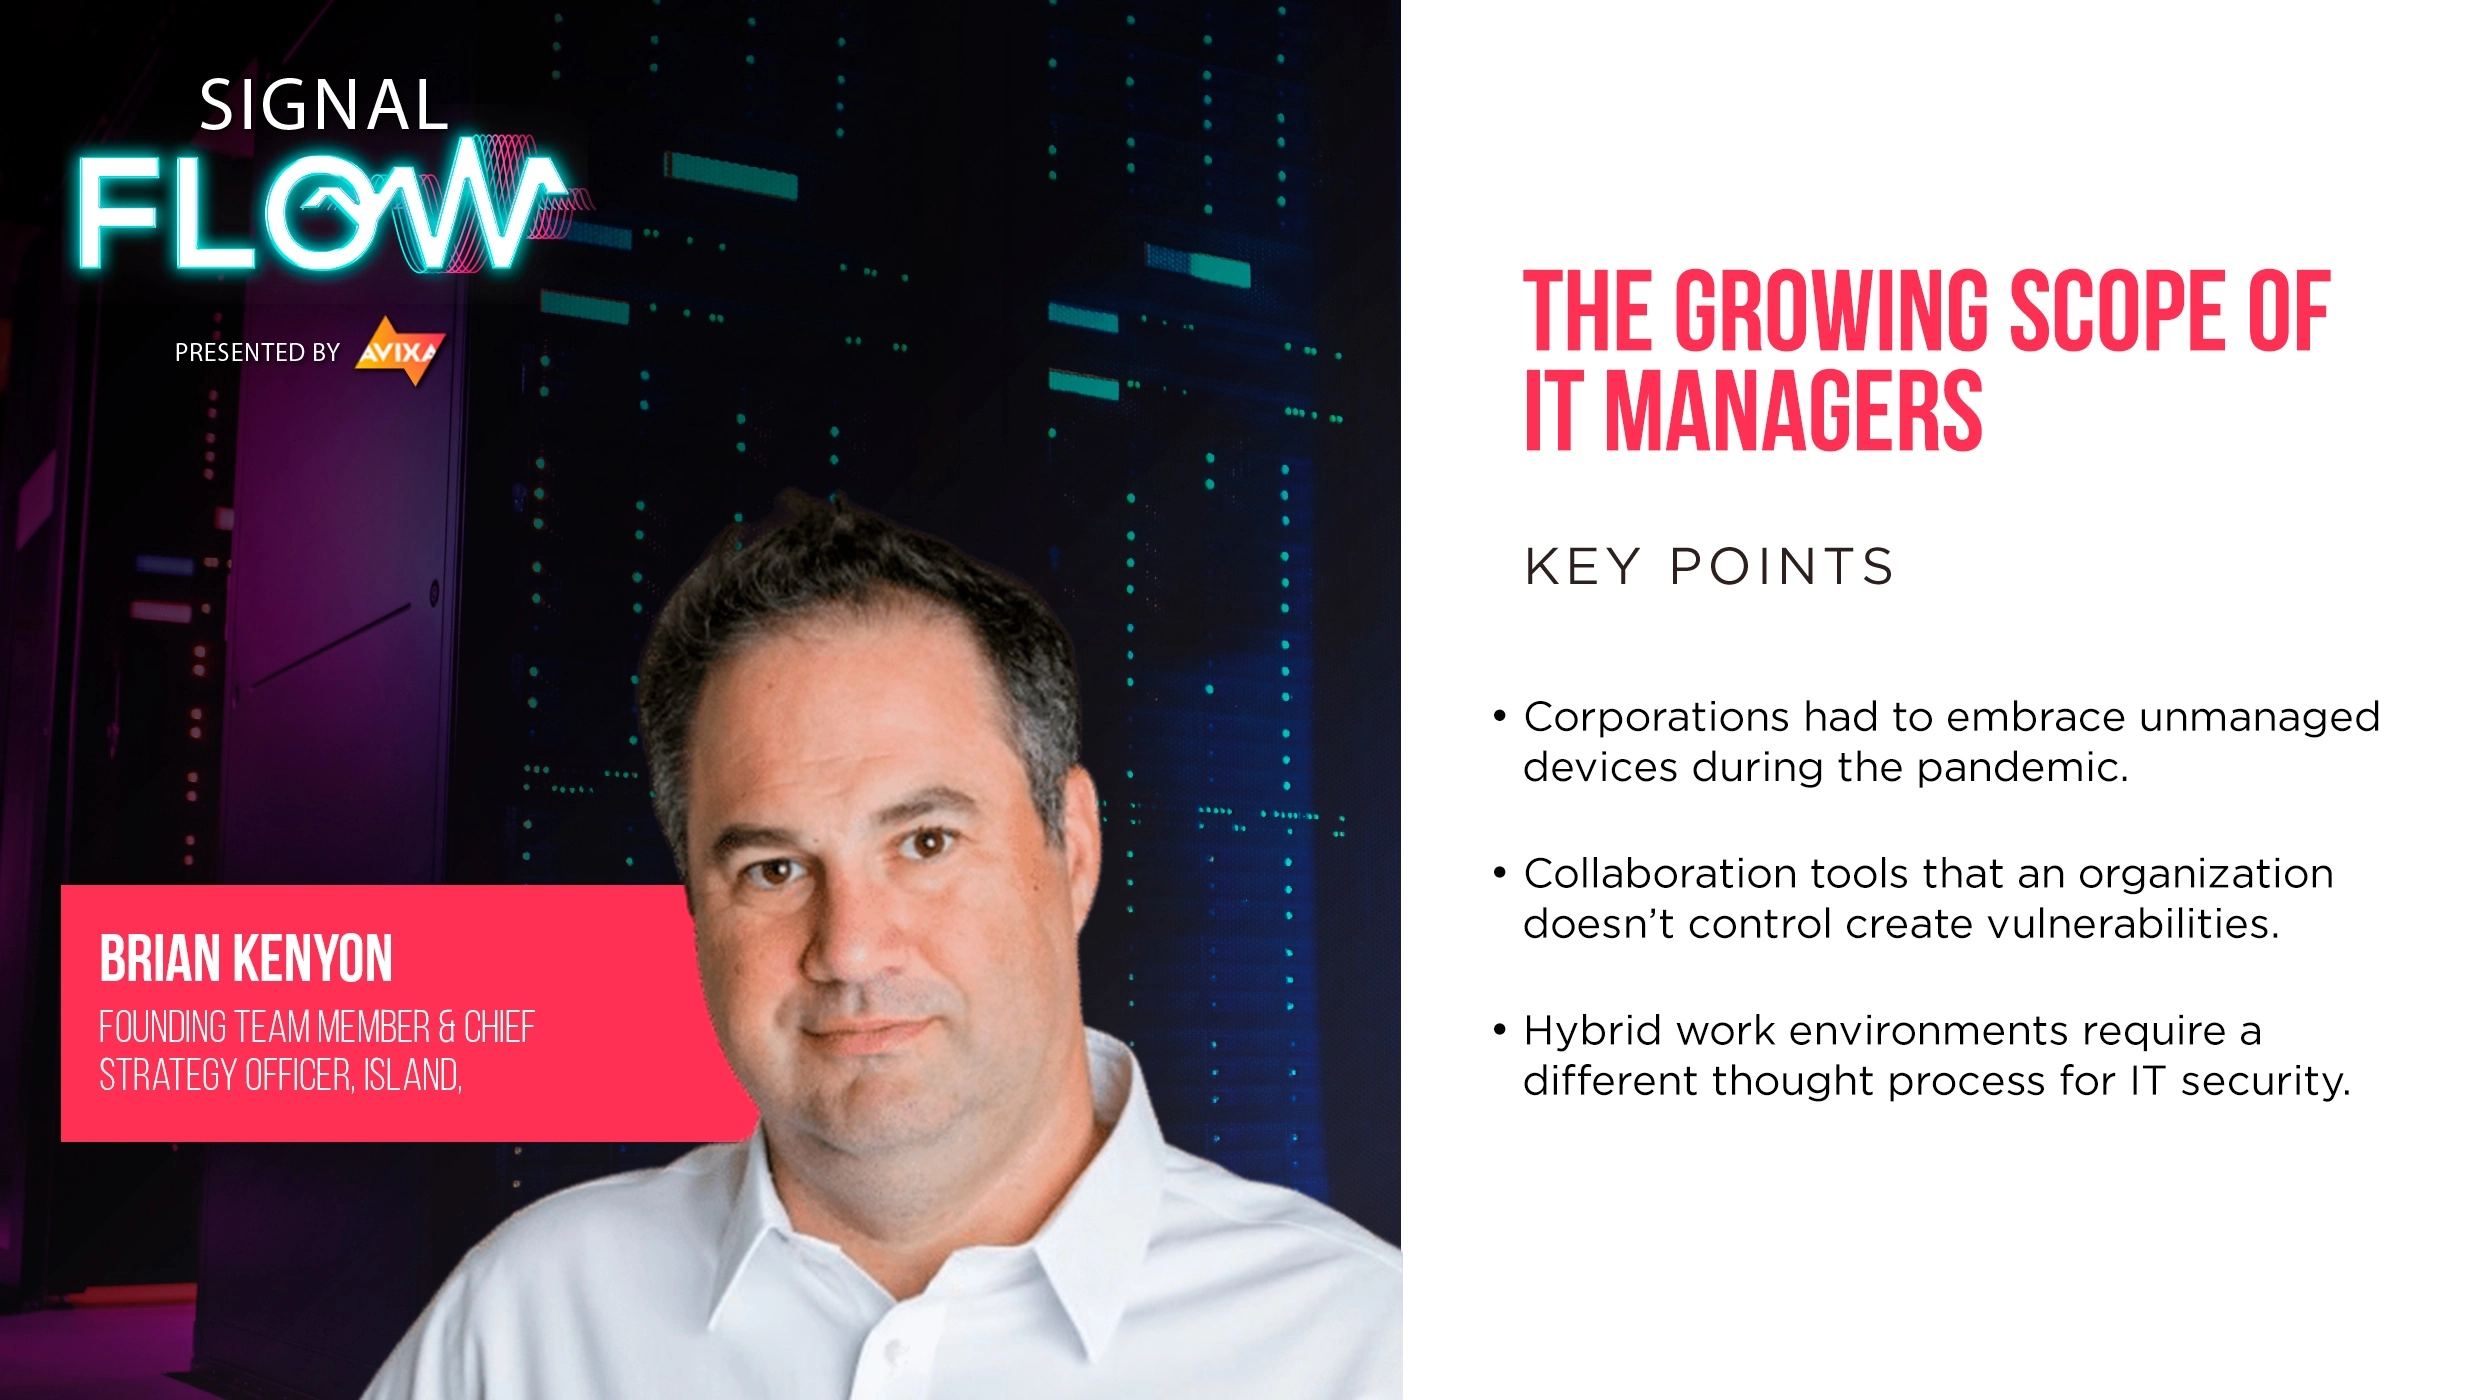 The Growing Scope of IT Managers